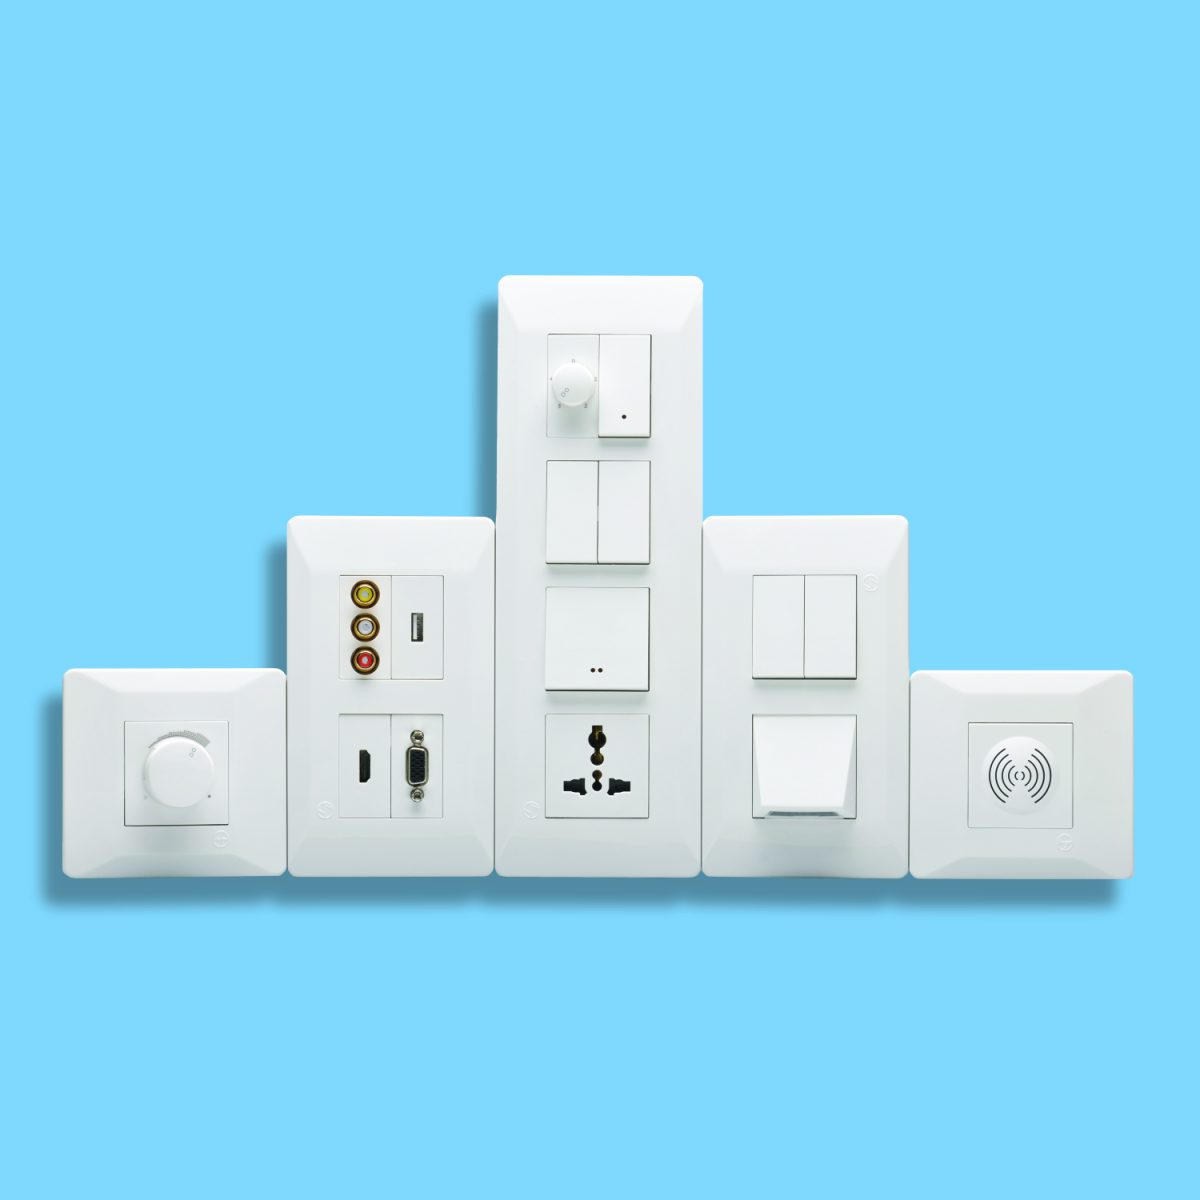 ALL YOU NEED TO KNOW ABOUT ELECTRICAL MODULAR SOCKETS